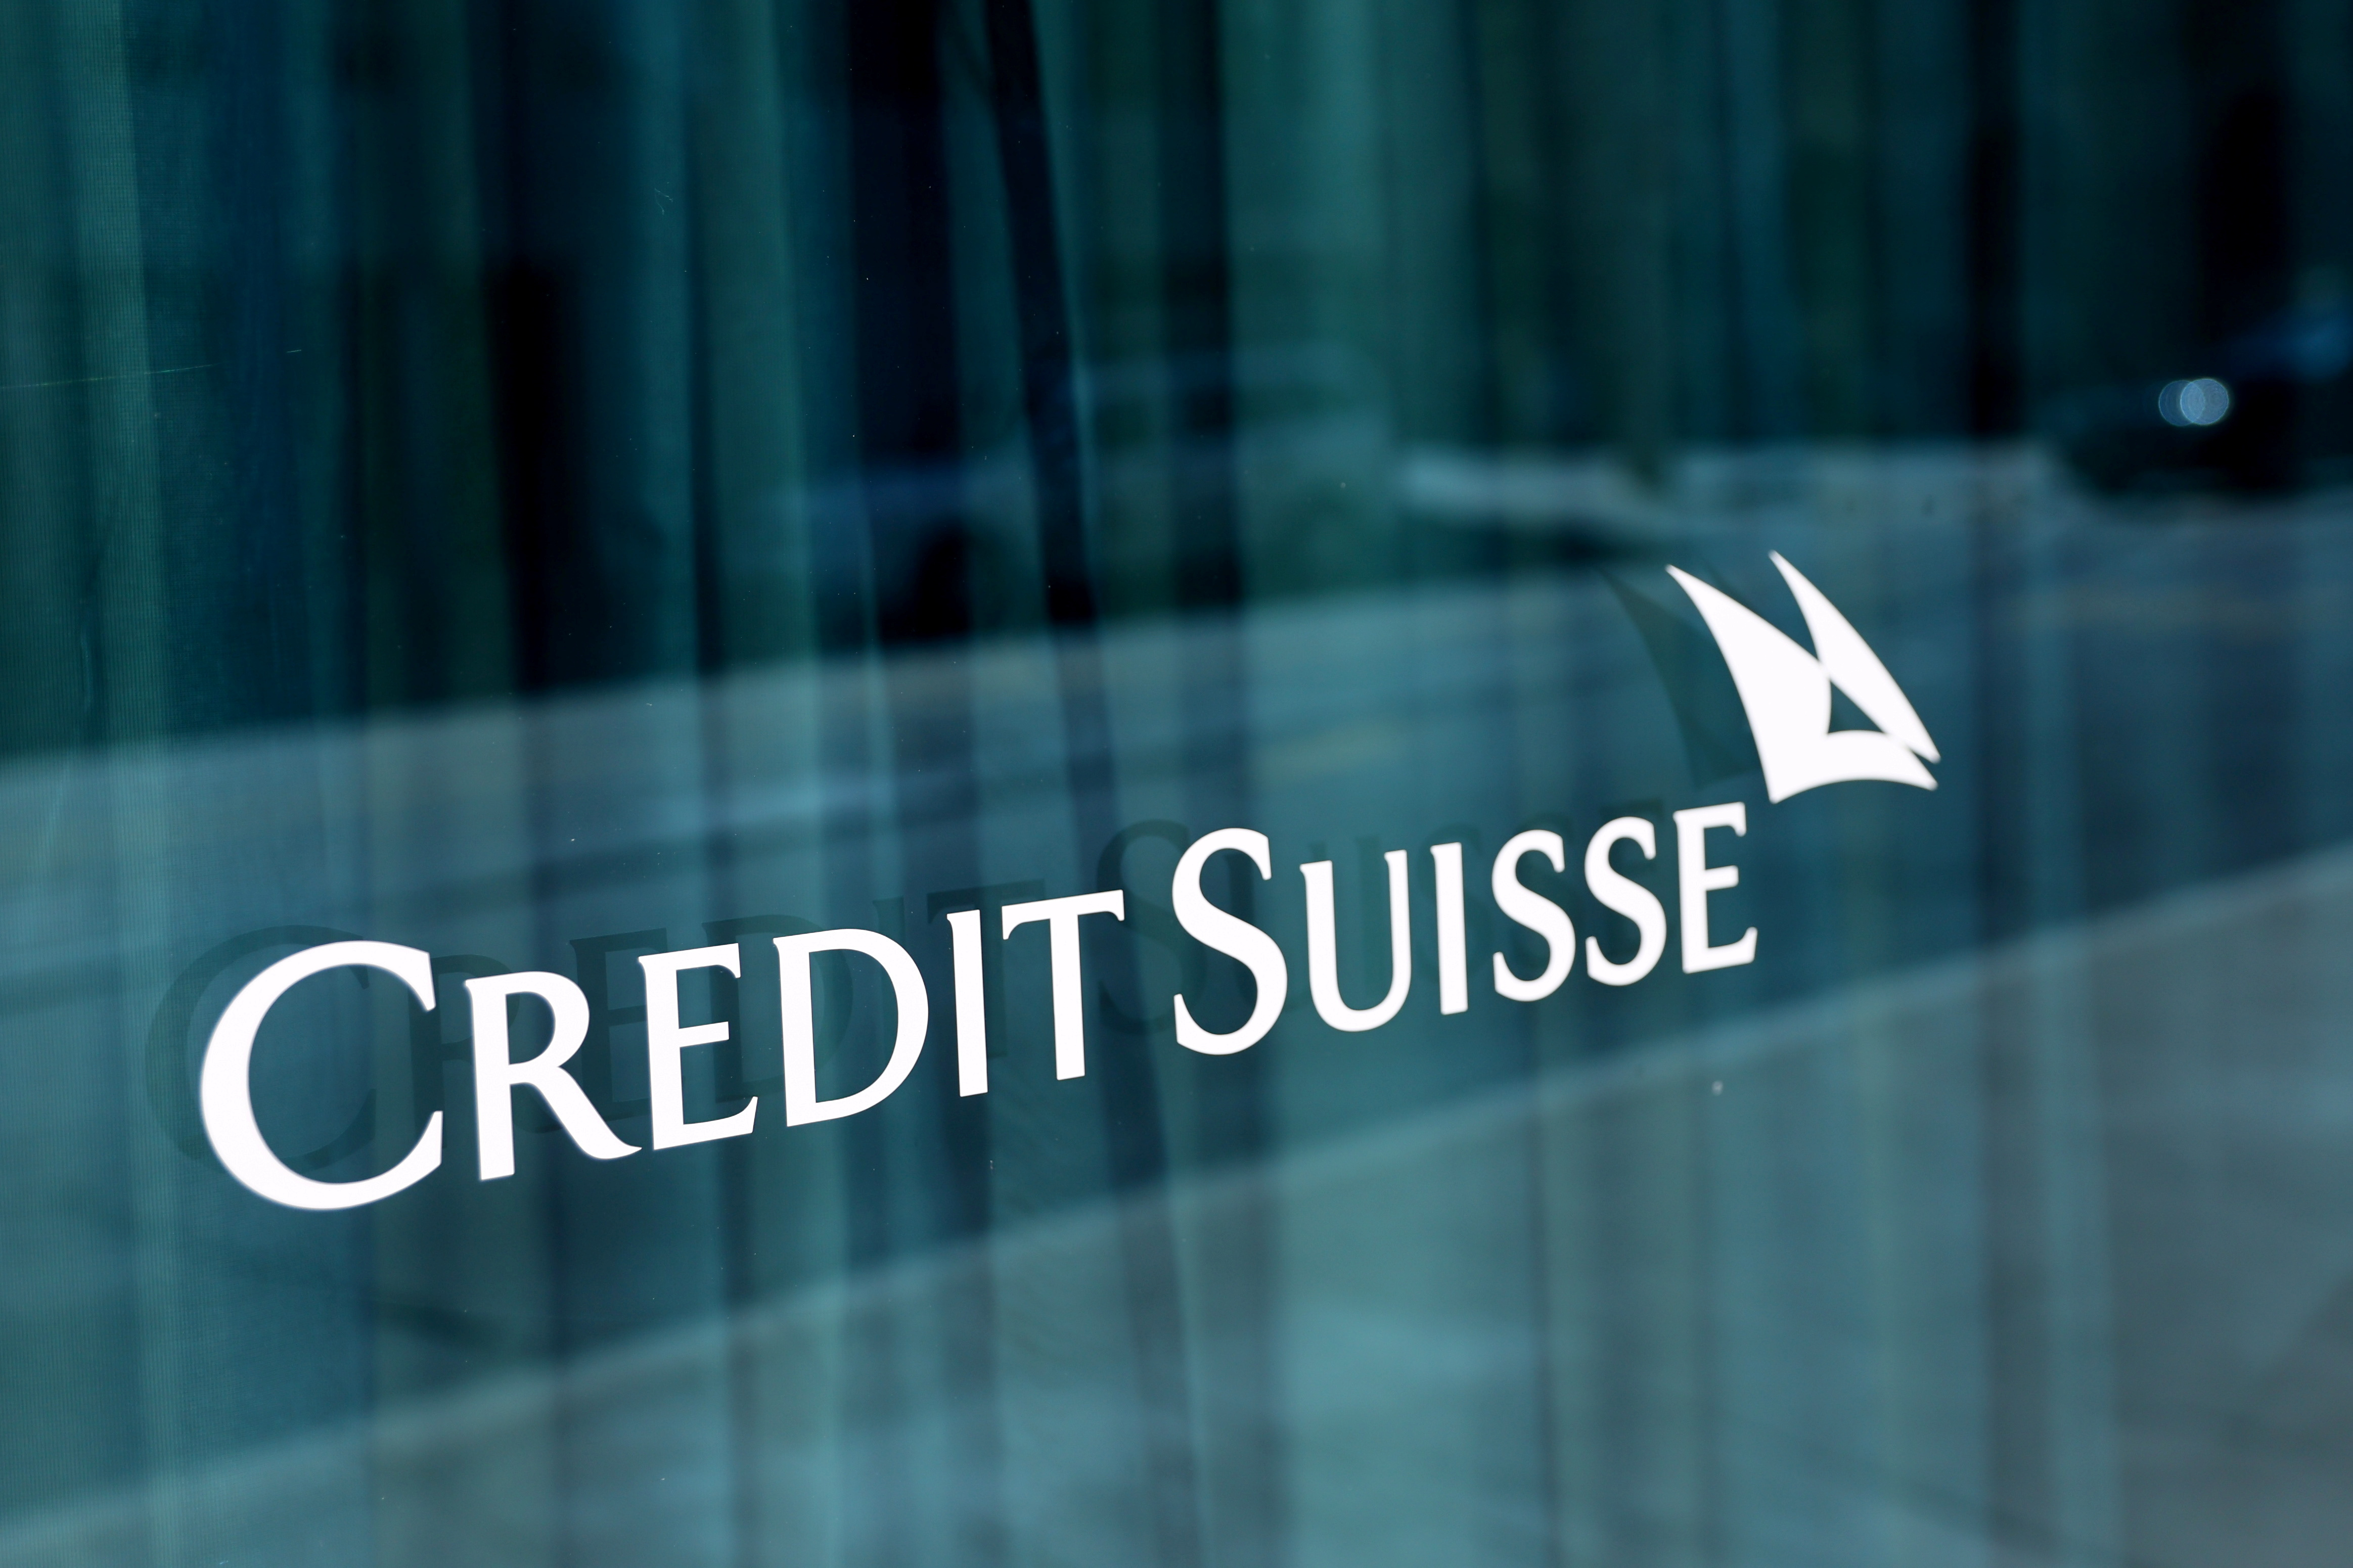 A logo is pictured on the Credit Suisse bank in Geneva,